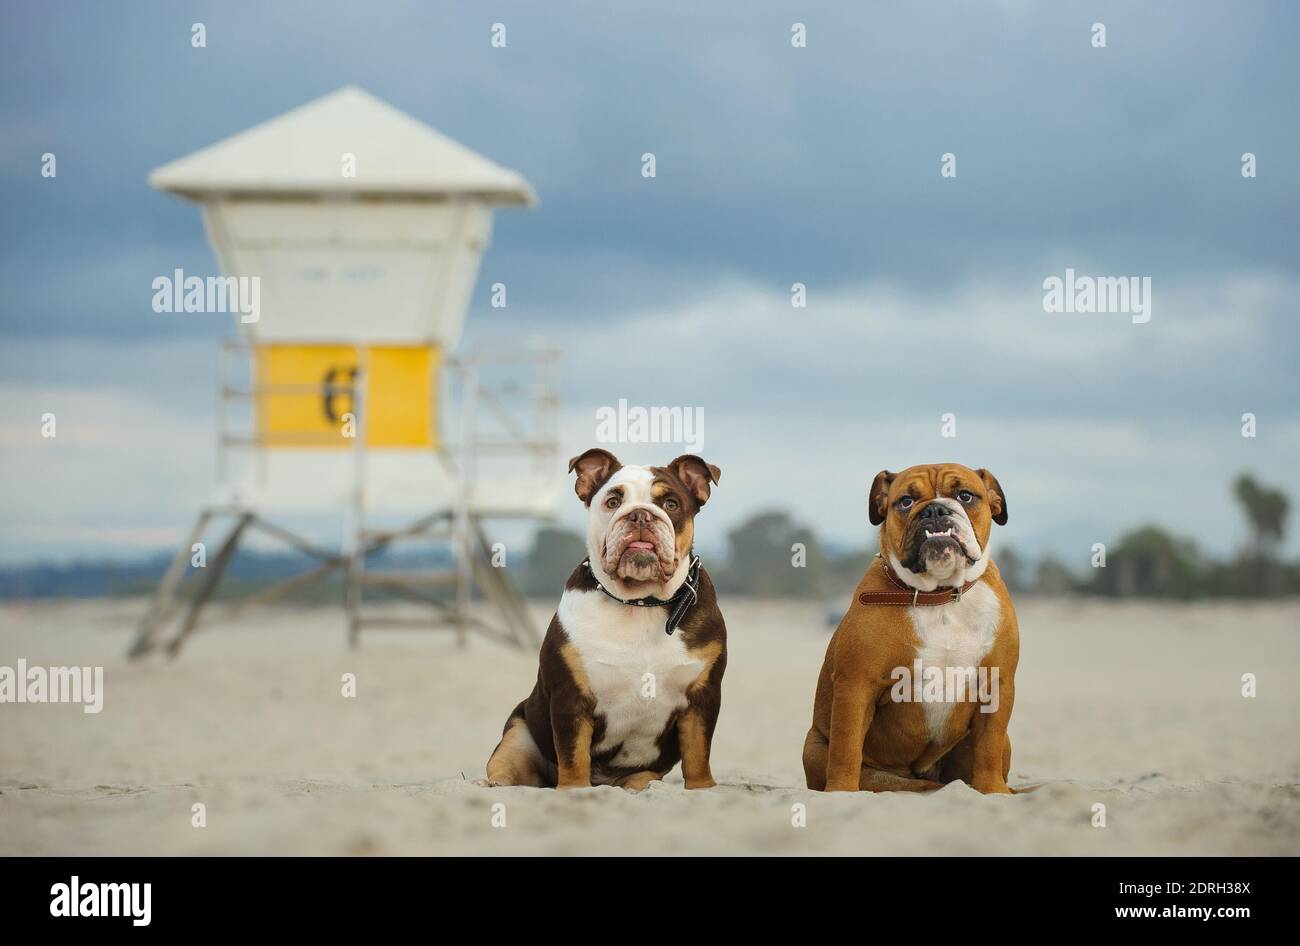 Dogs Sitting Against Lifeguard Hut At Beach Stock Photo